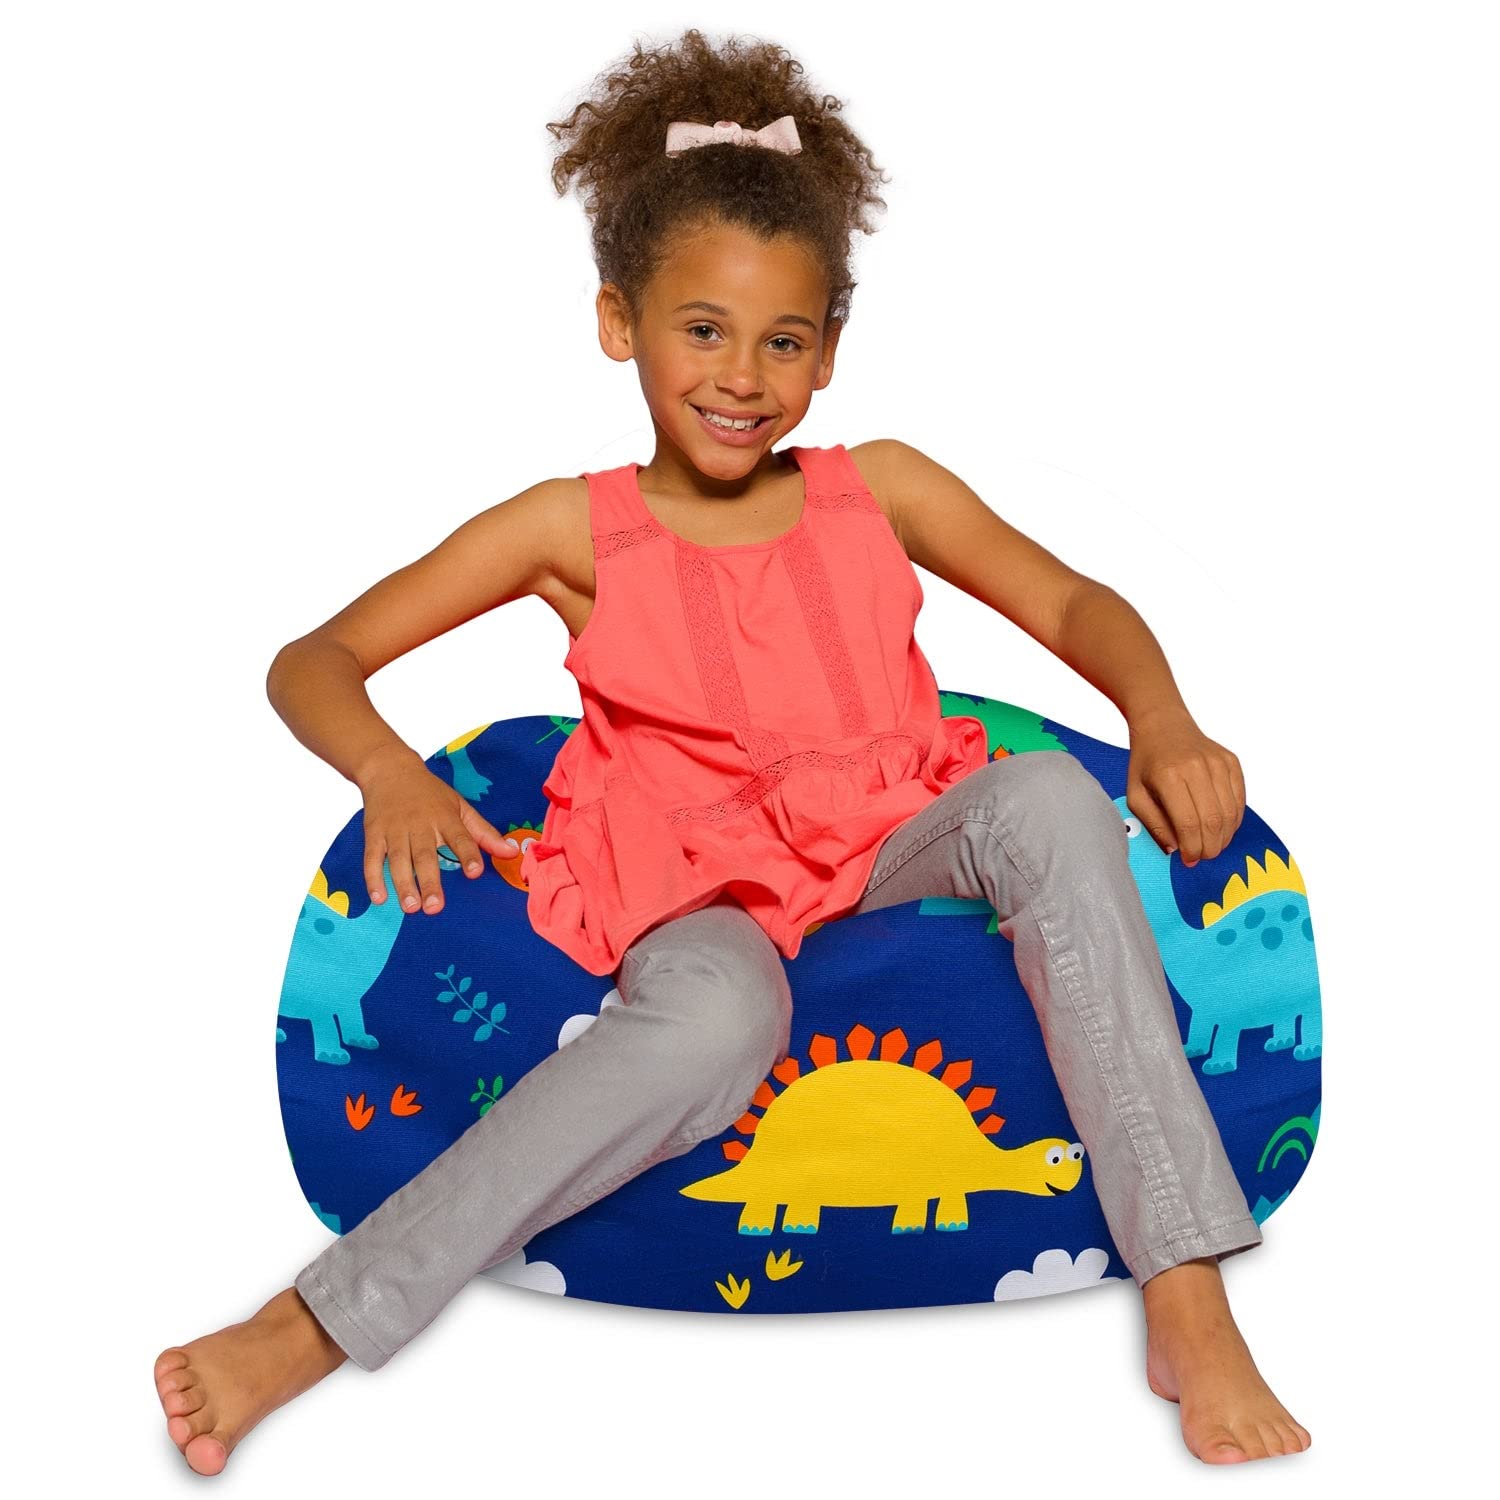 Posh Creations Bean Bag Chair for Kids, Teens, and Adults Includes Removable and Machine Washable Cover, Canvas Dinos on Blue, 2